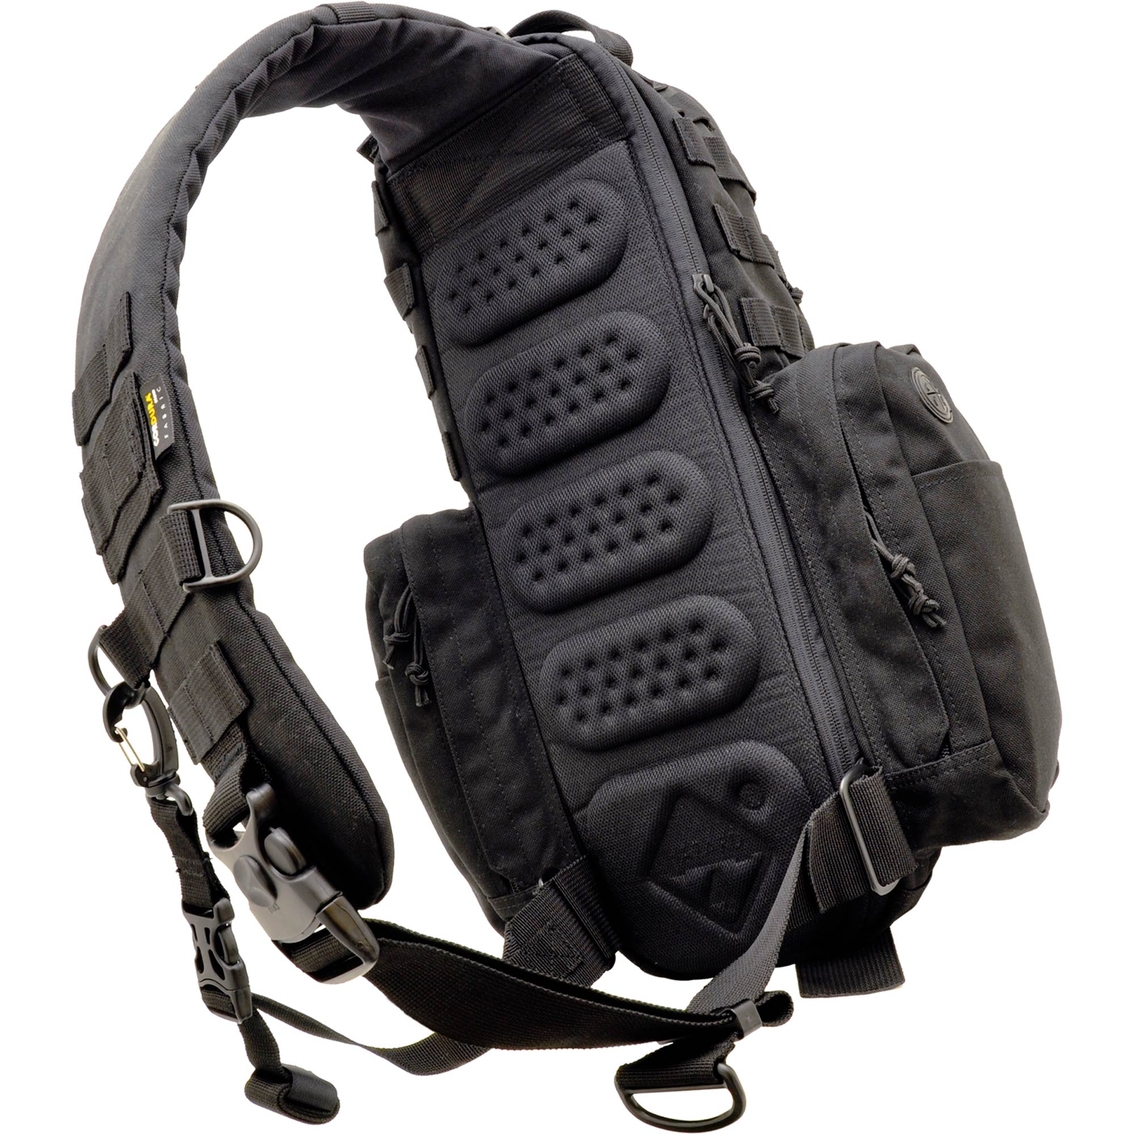 Hazard 4 Rocket Classic Tactical Sling Pack - Image 2 of 2